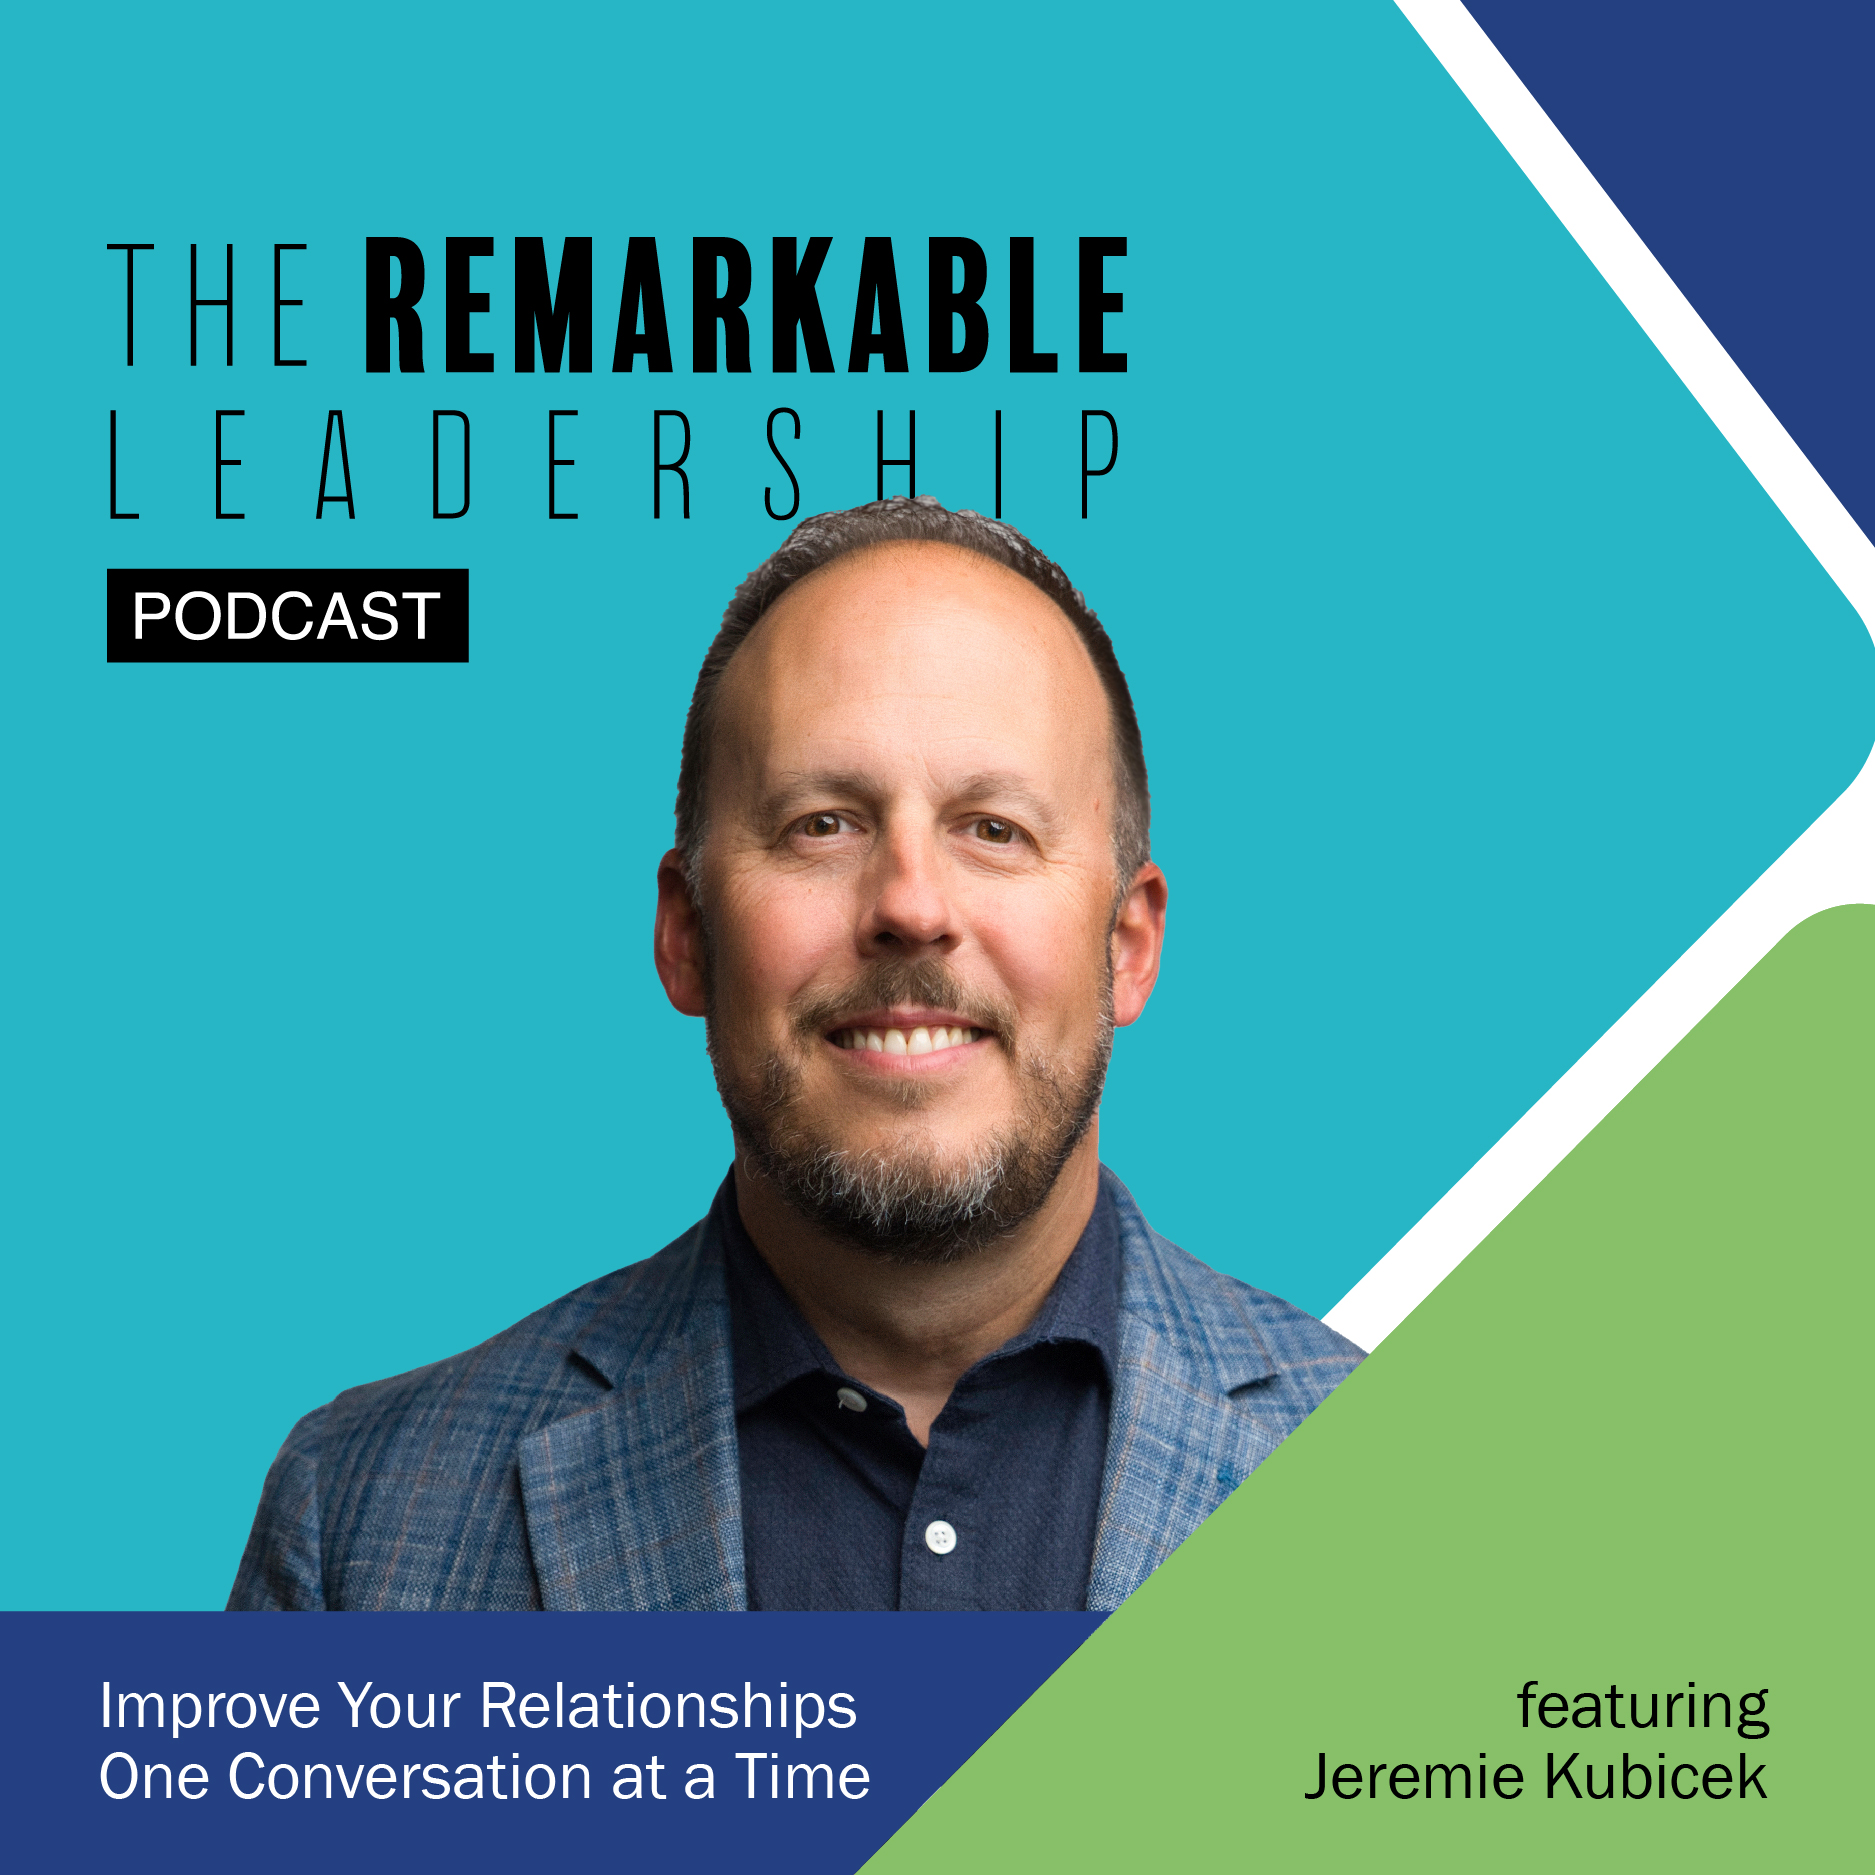 Improve Your Relationships One Conversation at a Time with Jeremie Kubicek